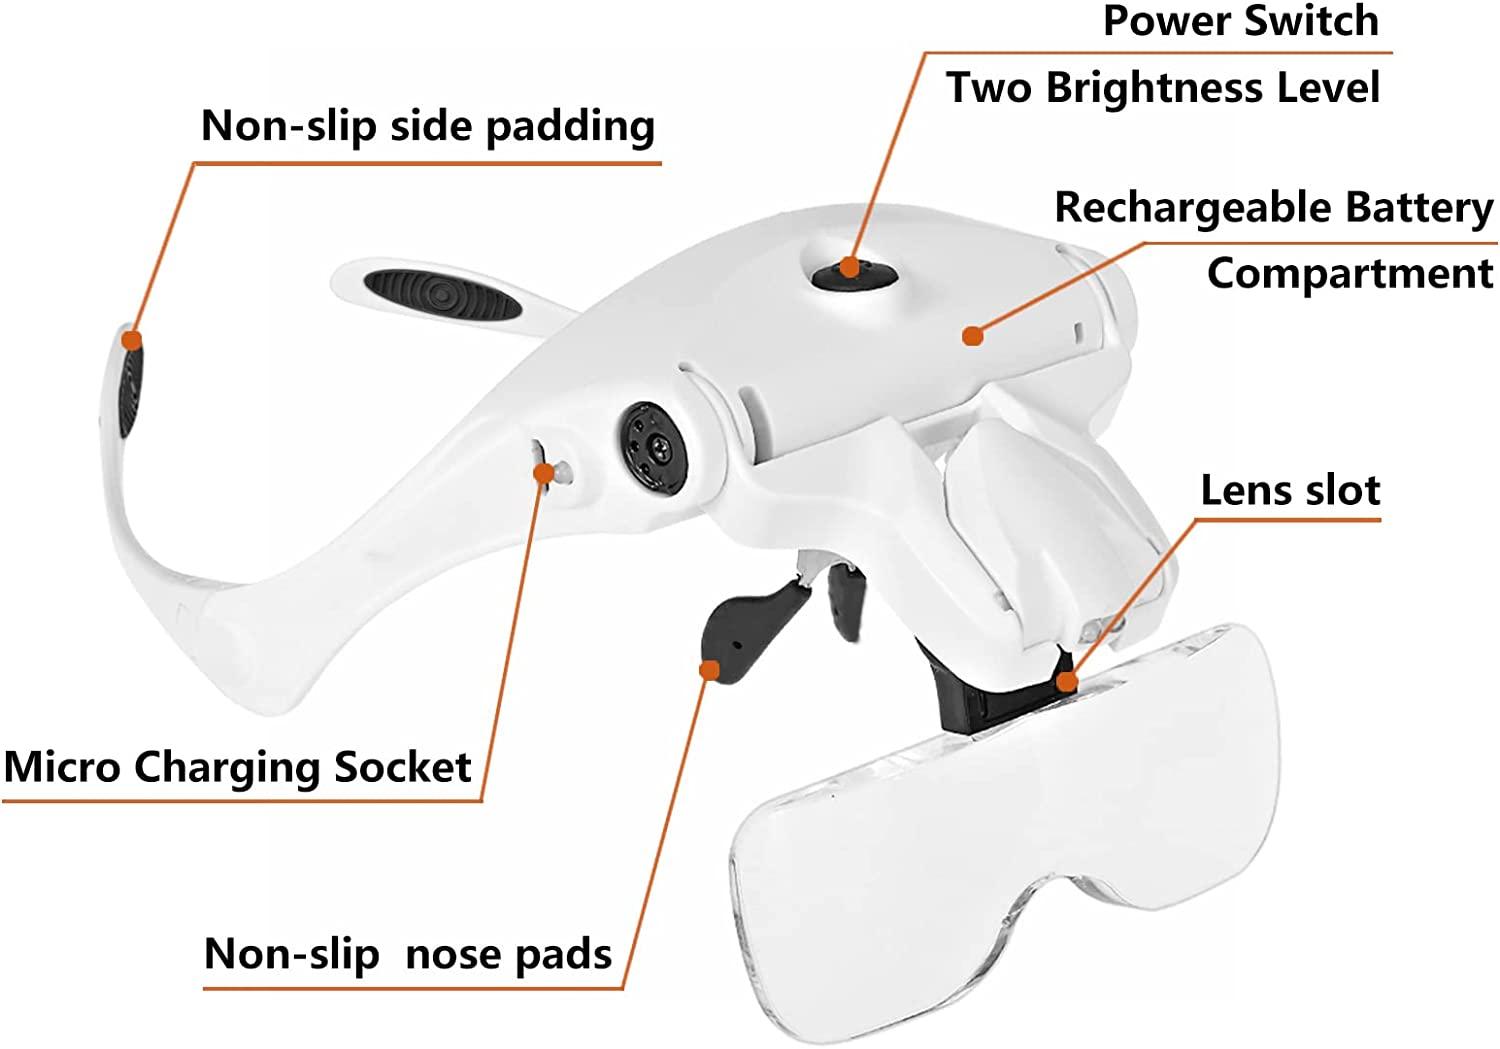 Head Magnifier Glasses with 2 LED Lights USB Charging Magnifying